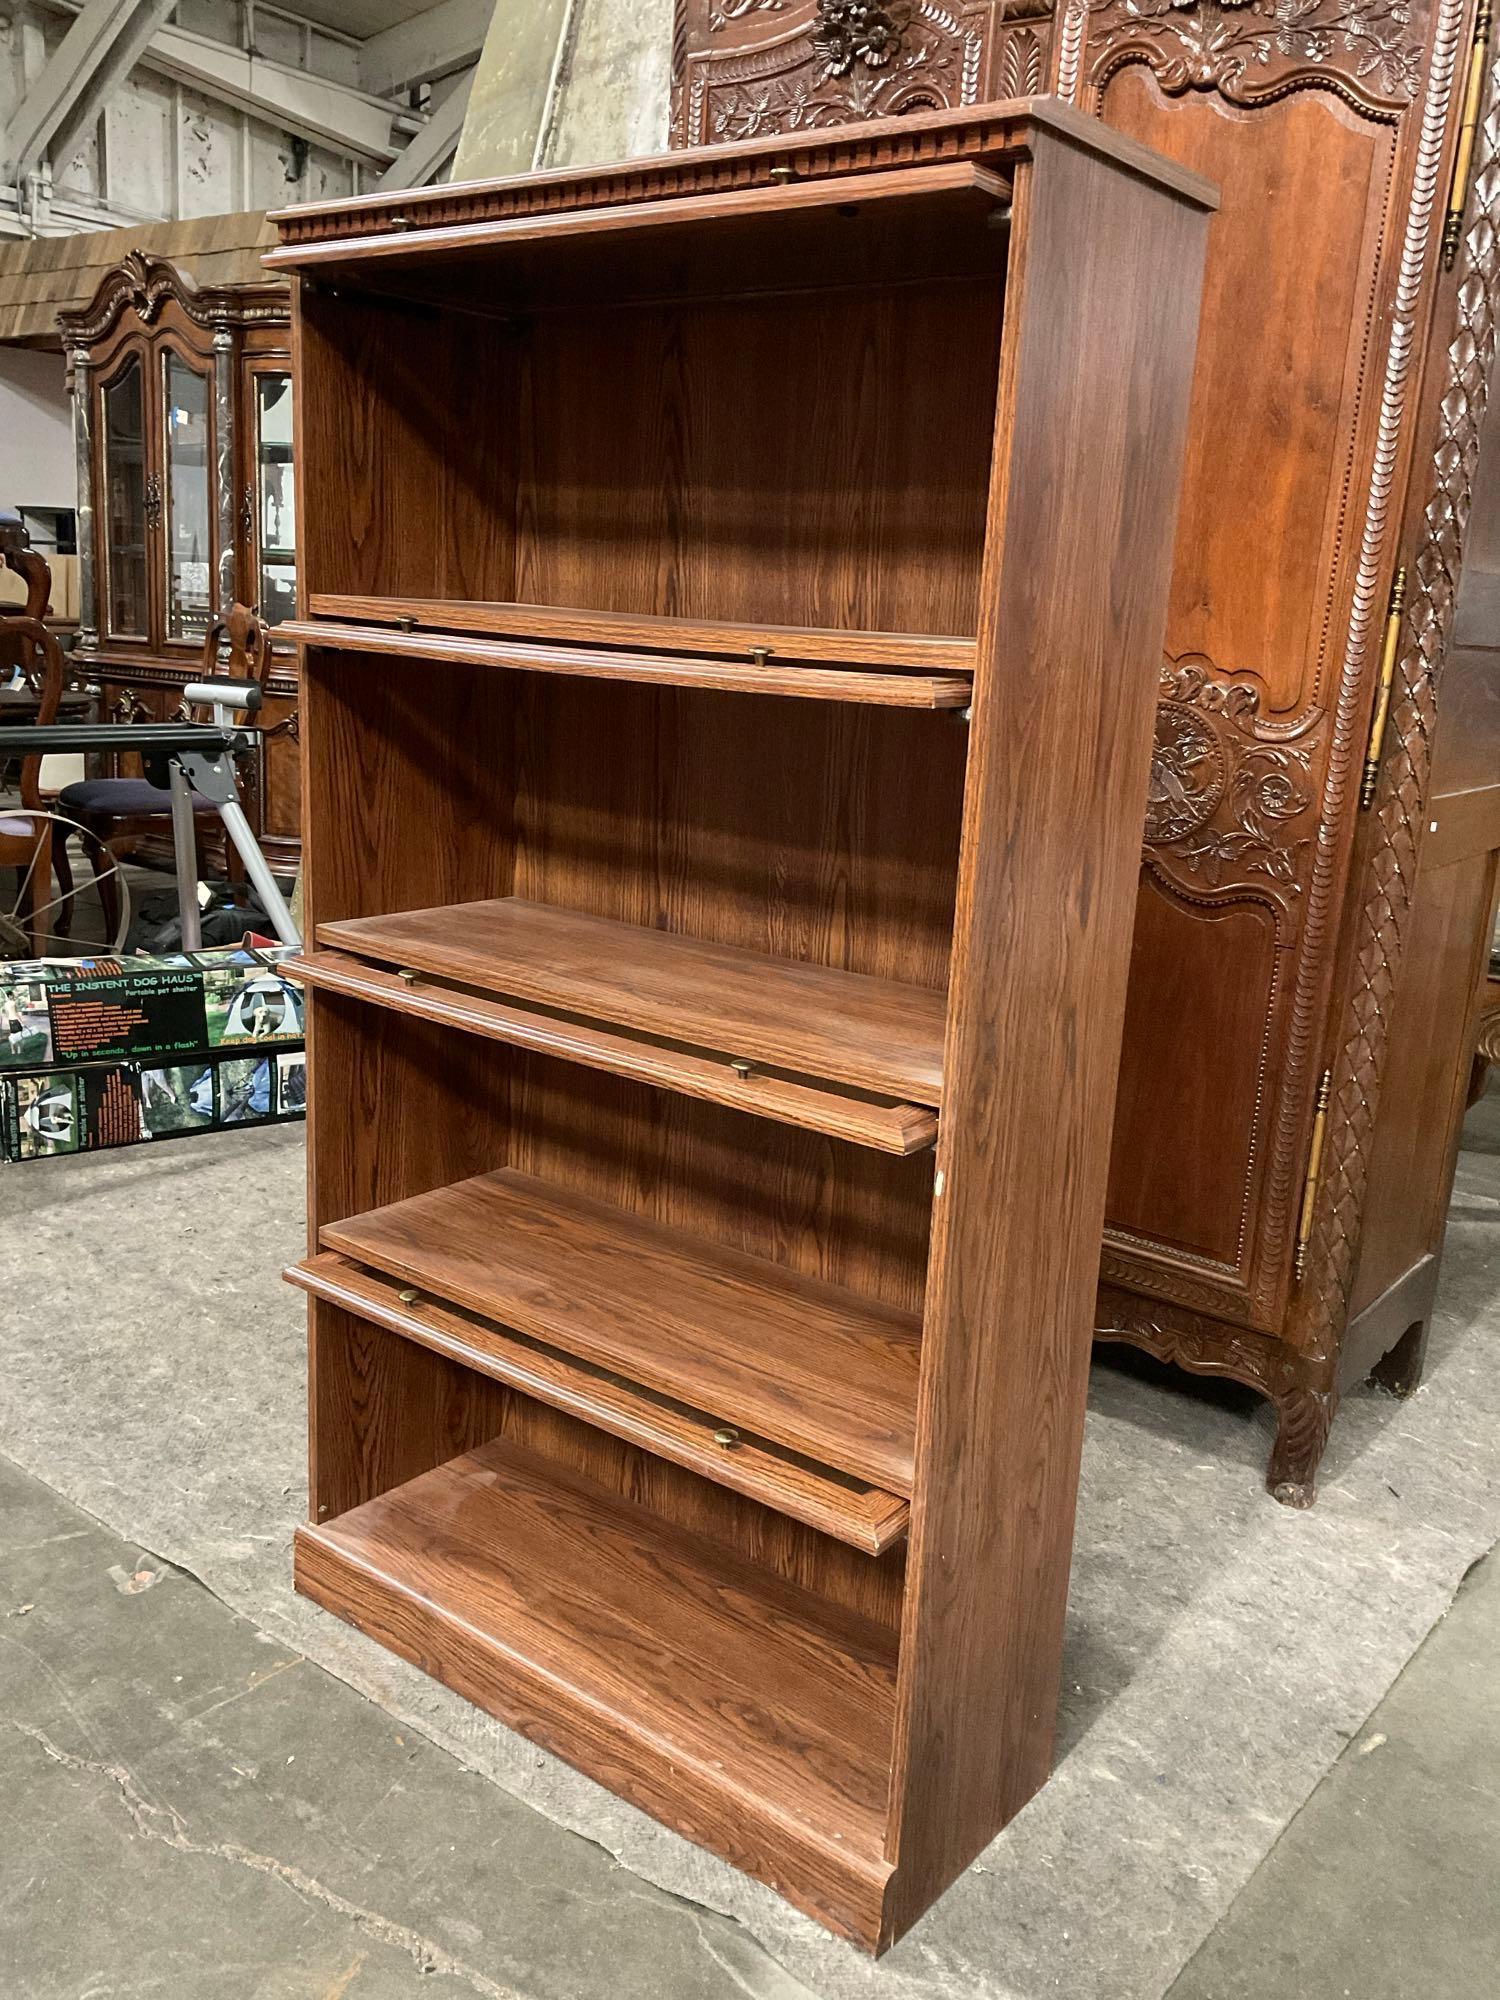 Vintage Wooden Barrister Bookcase w/ 4 Shelves & Folding Glass Fronts. Measures 34" x 61" See pics.